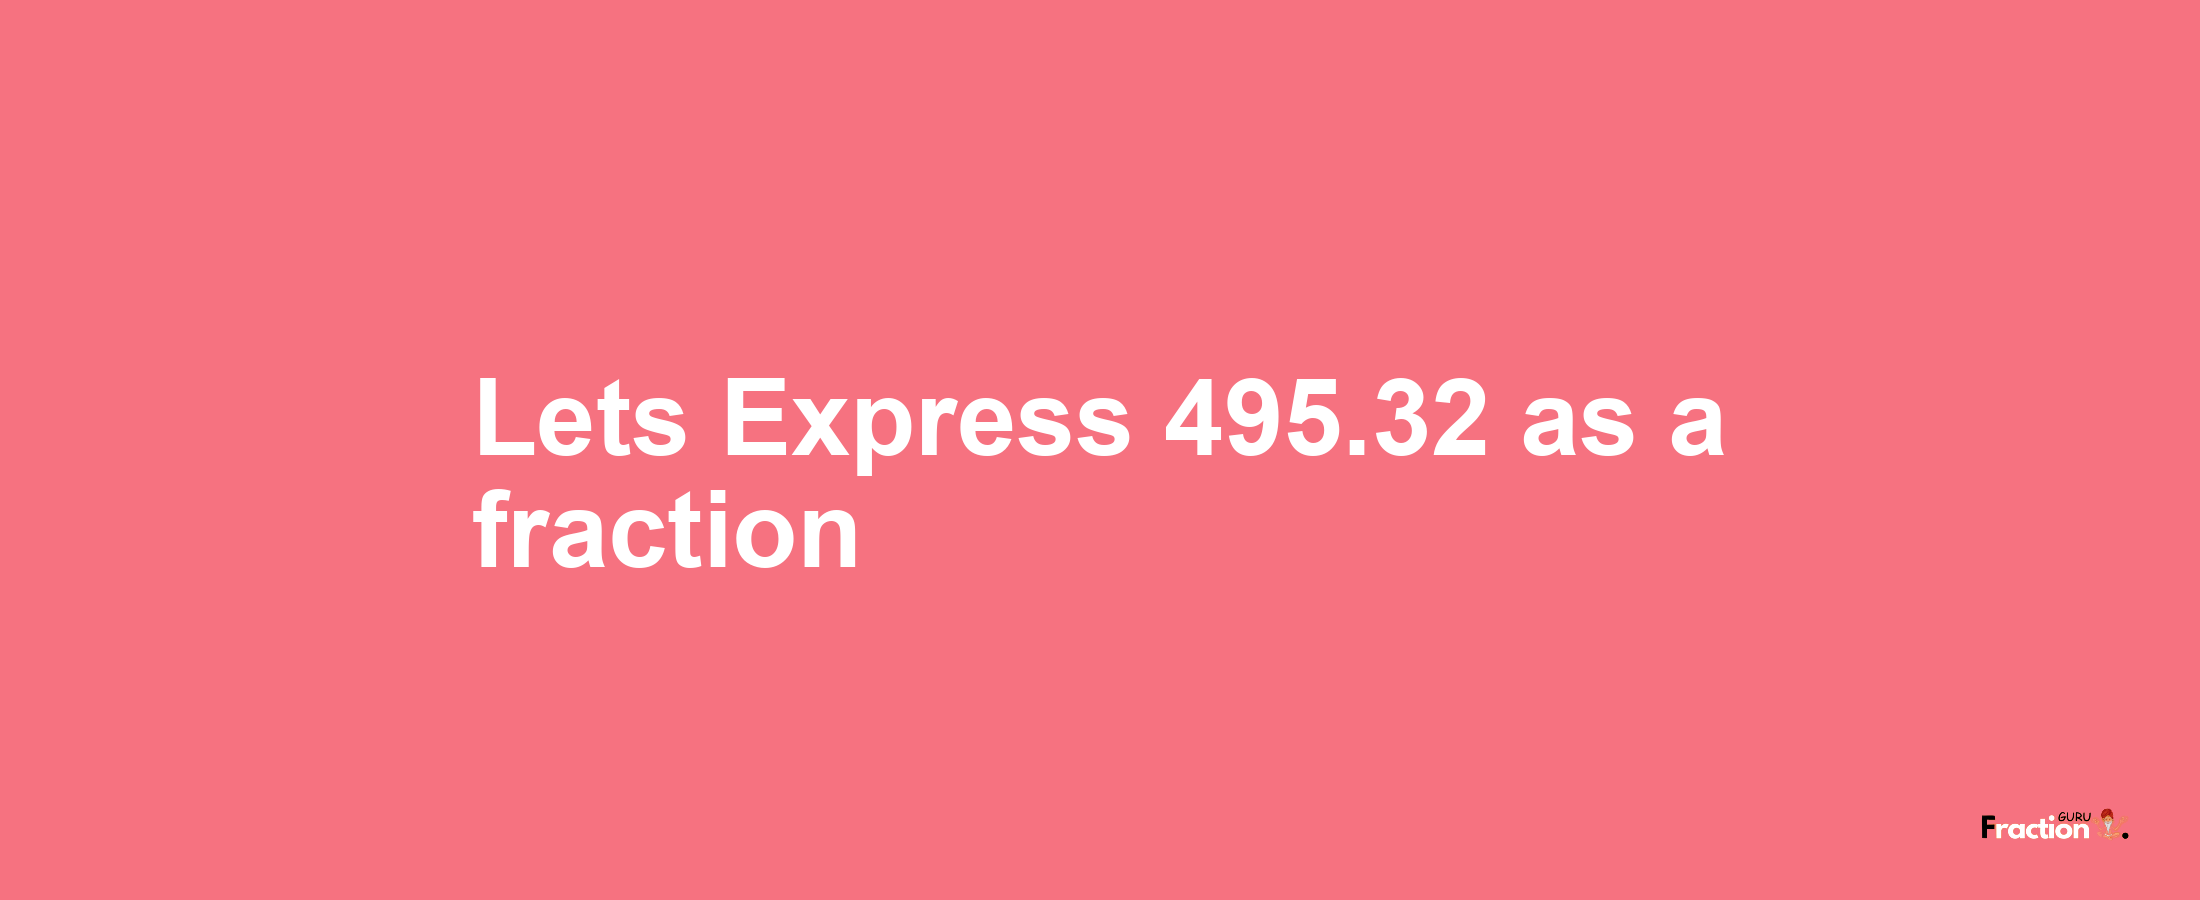 Lets Express 495.32 as afraction